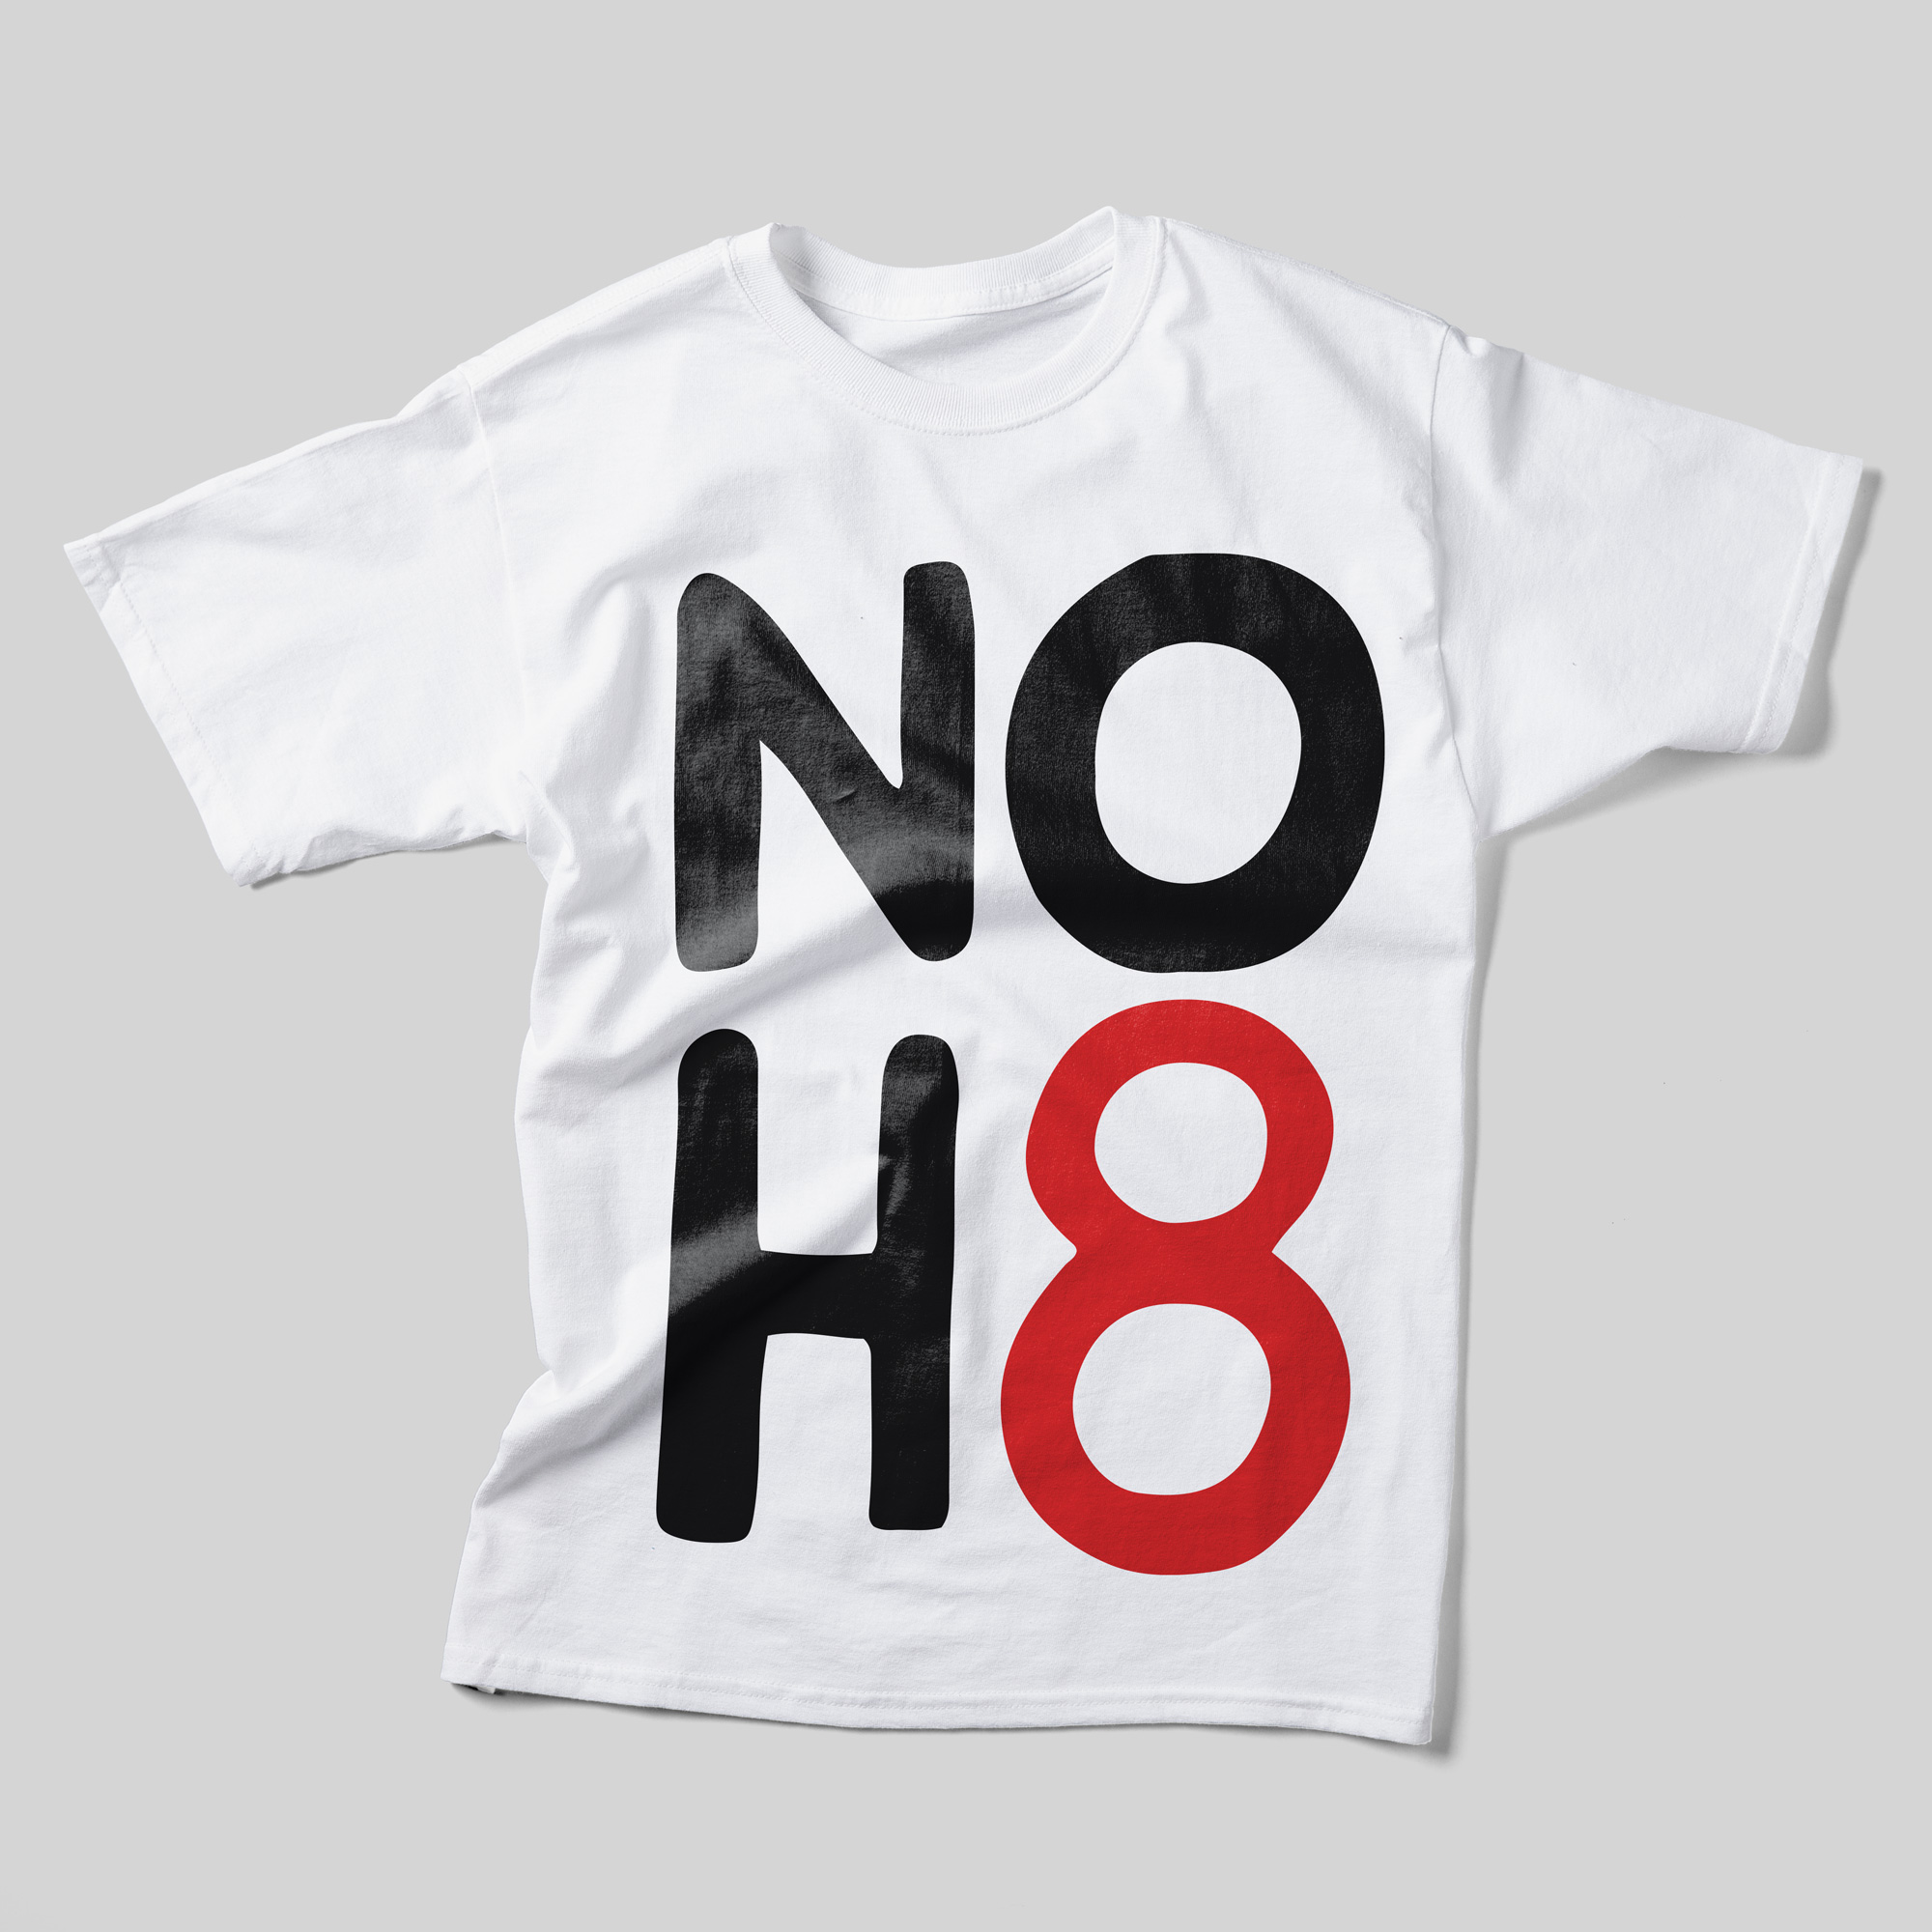 A white t-shirt with the NOH8 logo taking up the entire space of the front. "NOH" is in black and "8" is in red.